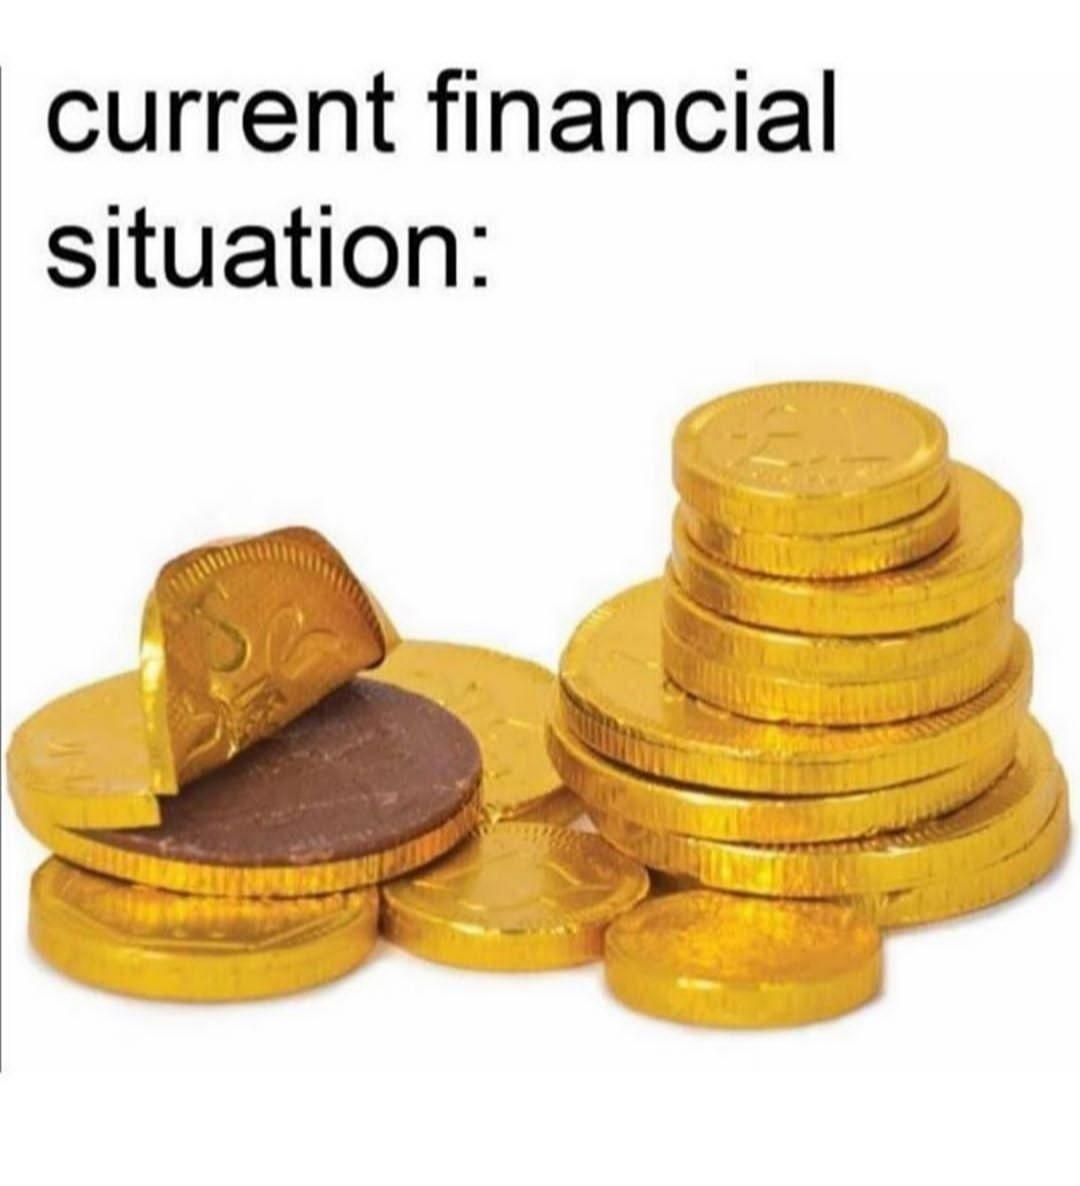 Current financial situation